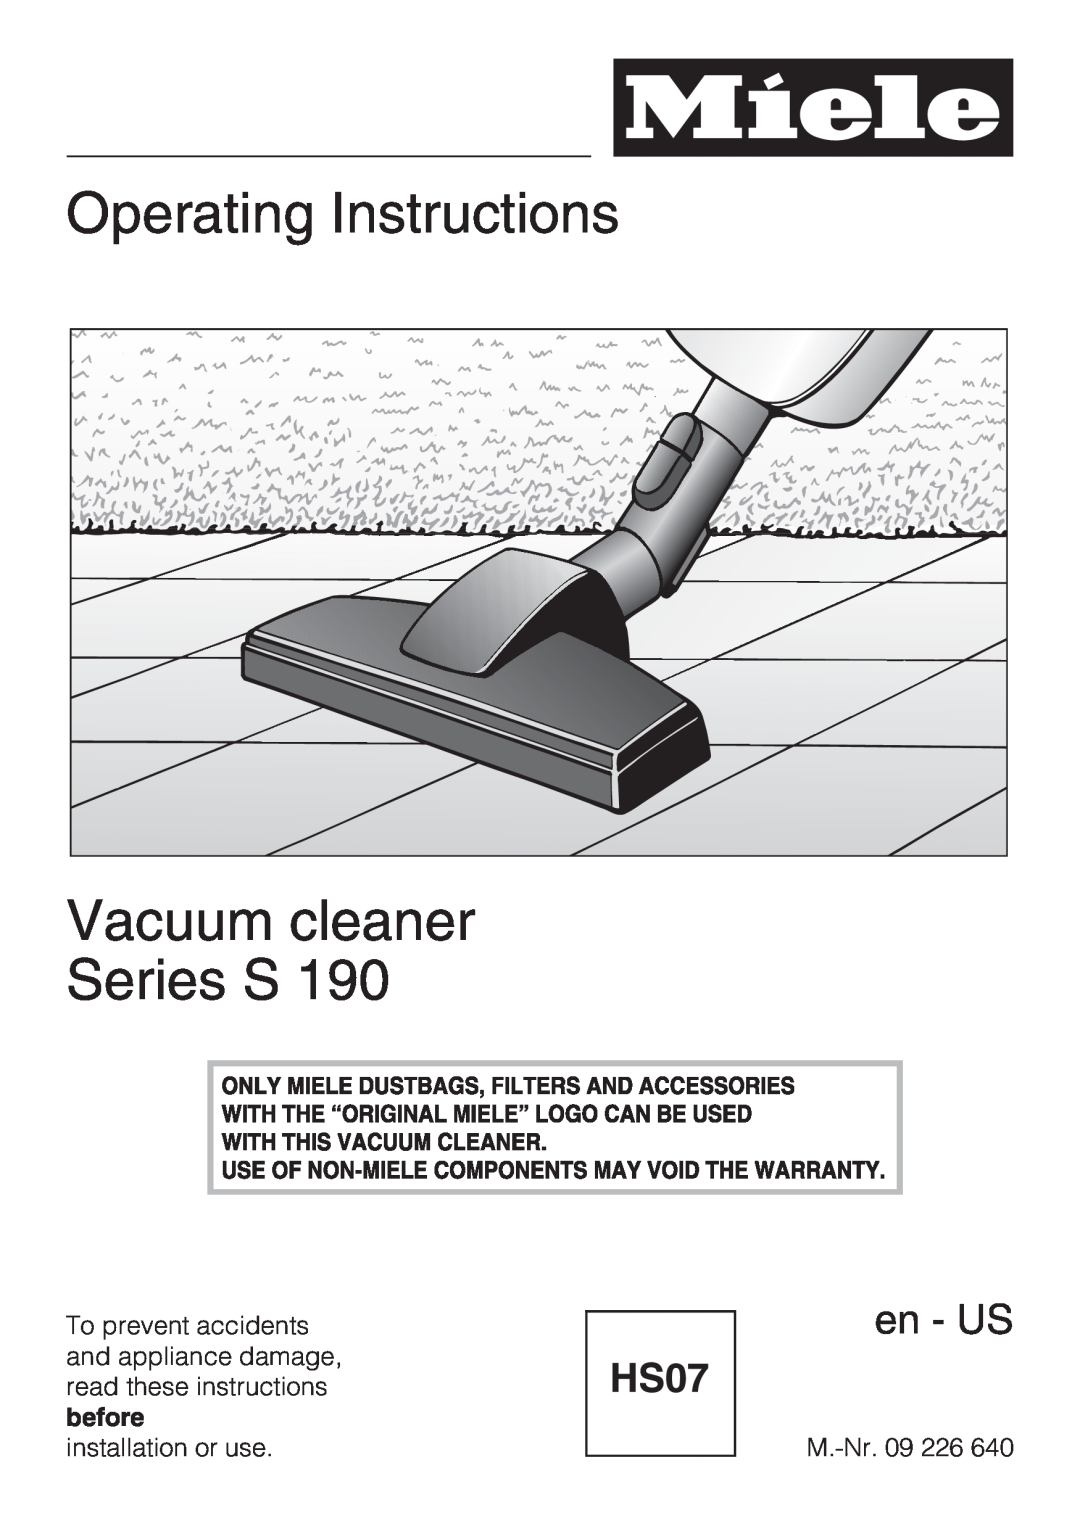 Miele S 190 operating instructions Operating Instructions Vacuum cleaner Series S, en - US 